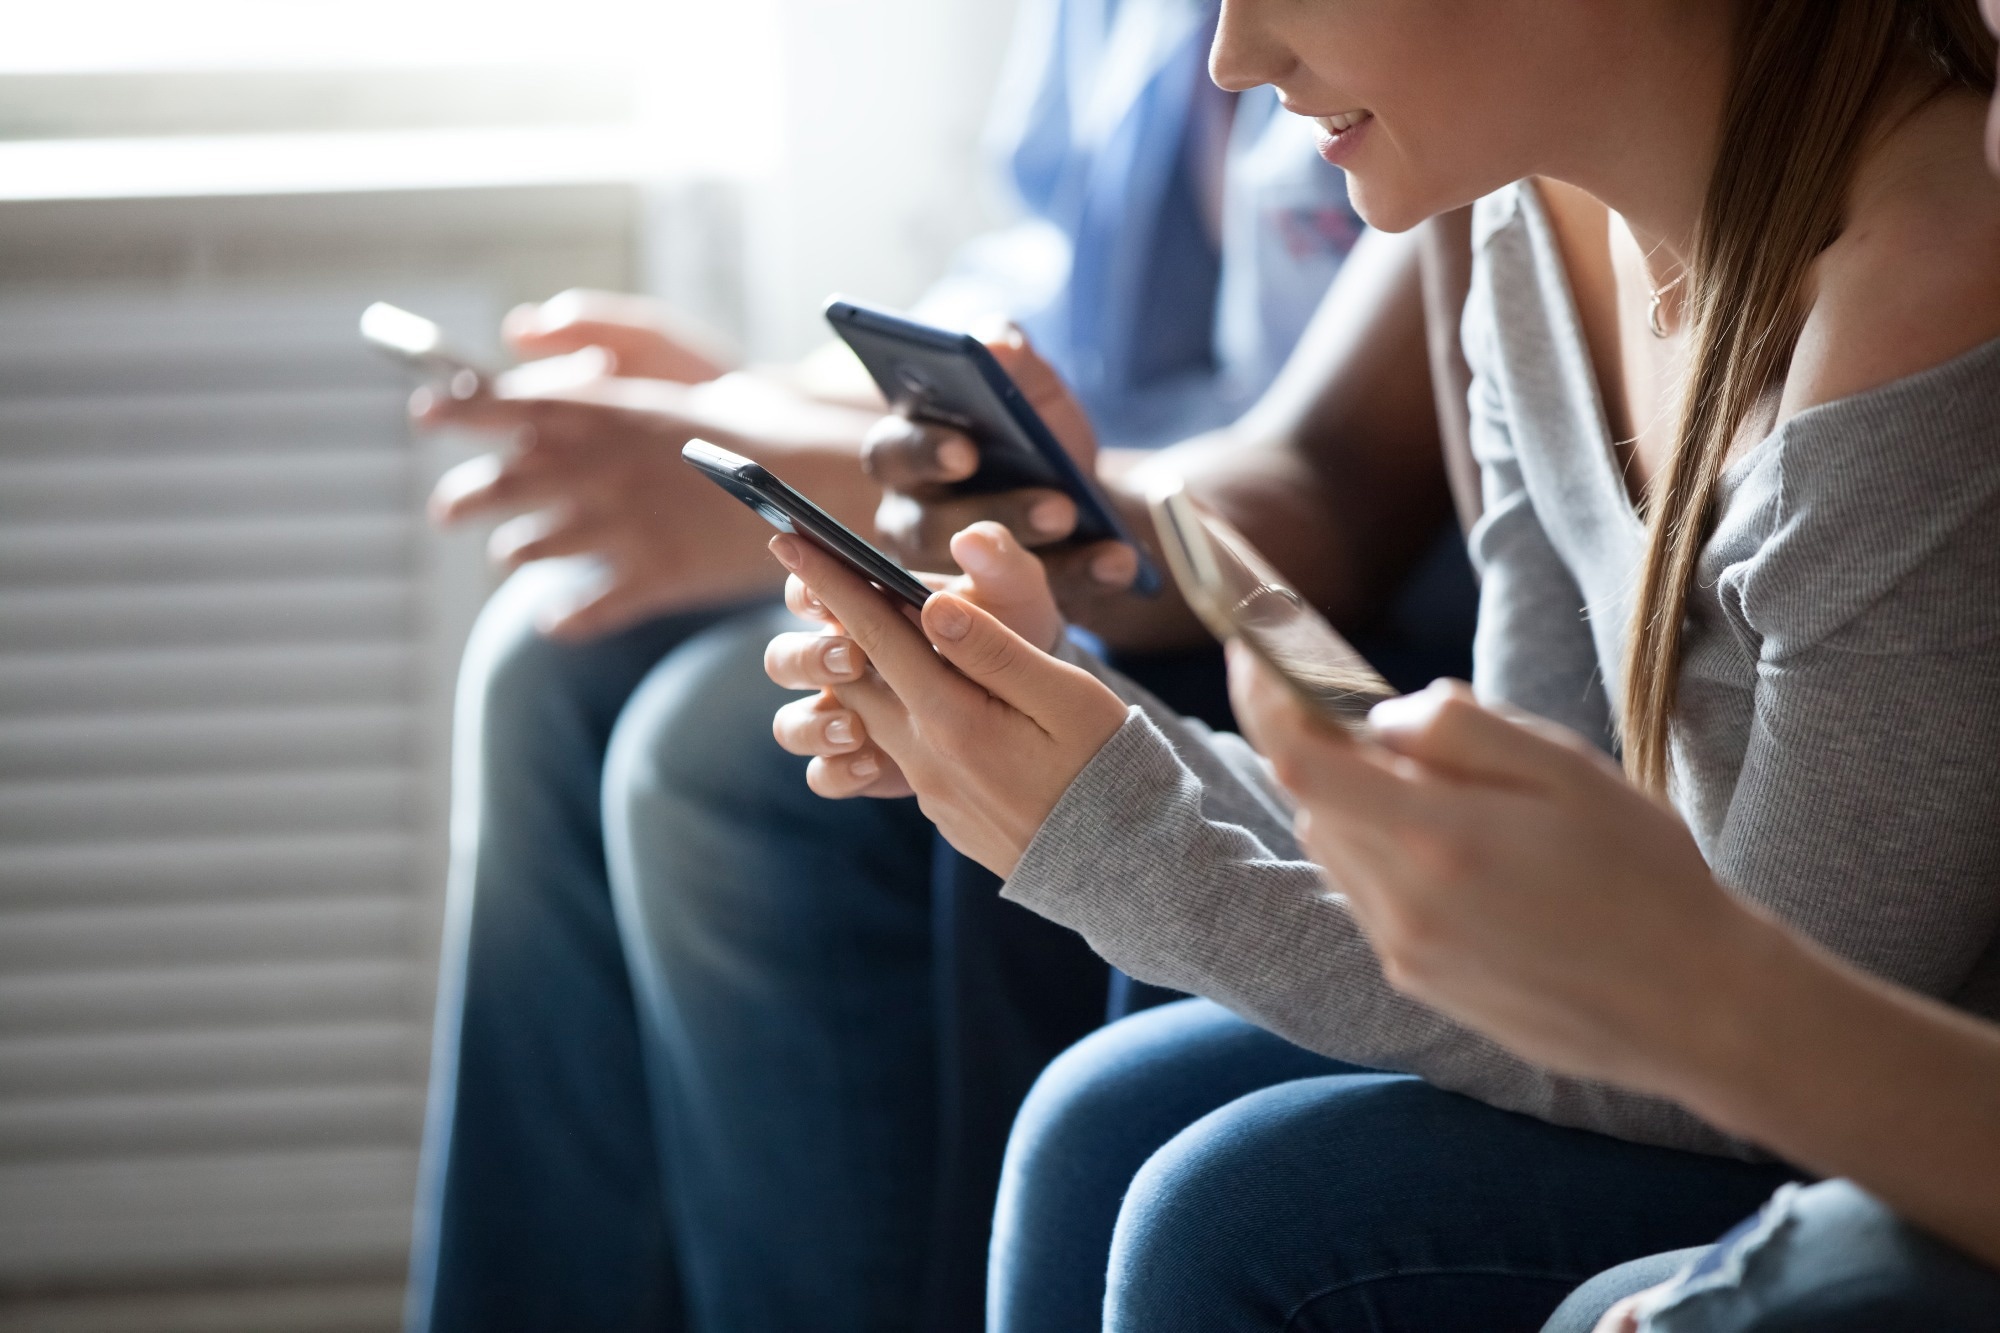 Study: At what distance should digital devices be viewed? Image Credit: fizkes/Shutterstock.com